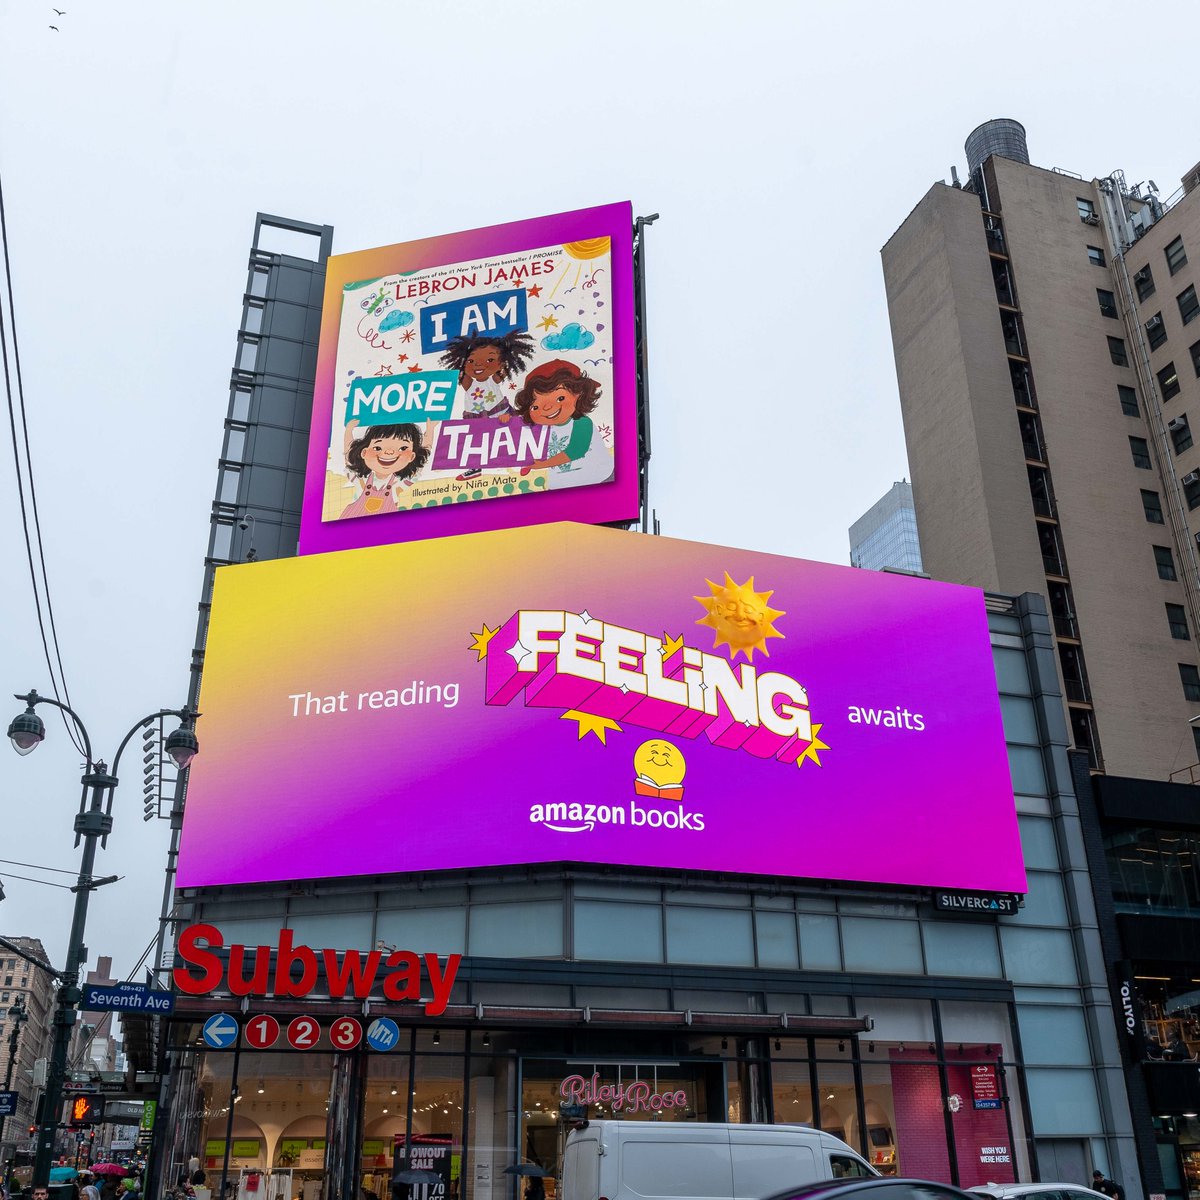 I can do BIG things. I believe in who I am. I’ll reach my goals… I AM MORE THAN! 👑🙌🏾 Happy #WeAreFamily Friday from the @amazonbooks New York City Billboard where #IAmMoreThan by @KingJames is featured! 🤩💚 📖 ljff.co/order-iammoret…